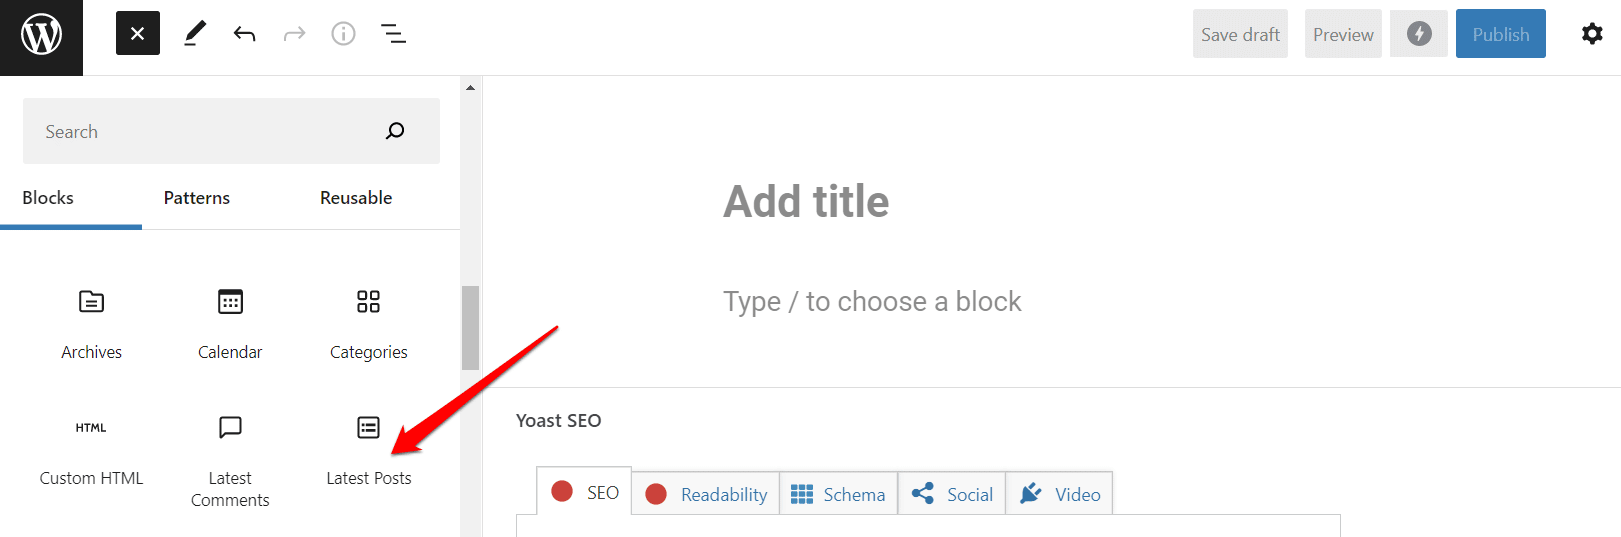 On WordPress you can add the "latest posts" block in the content.